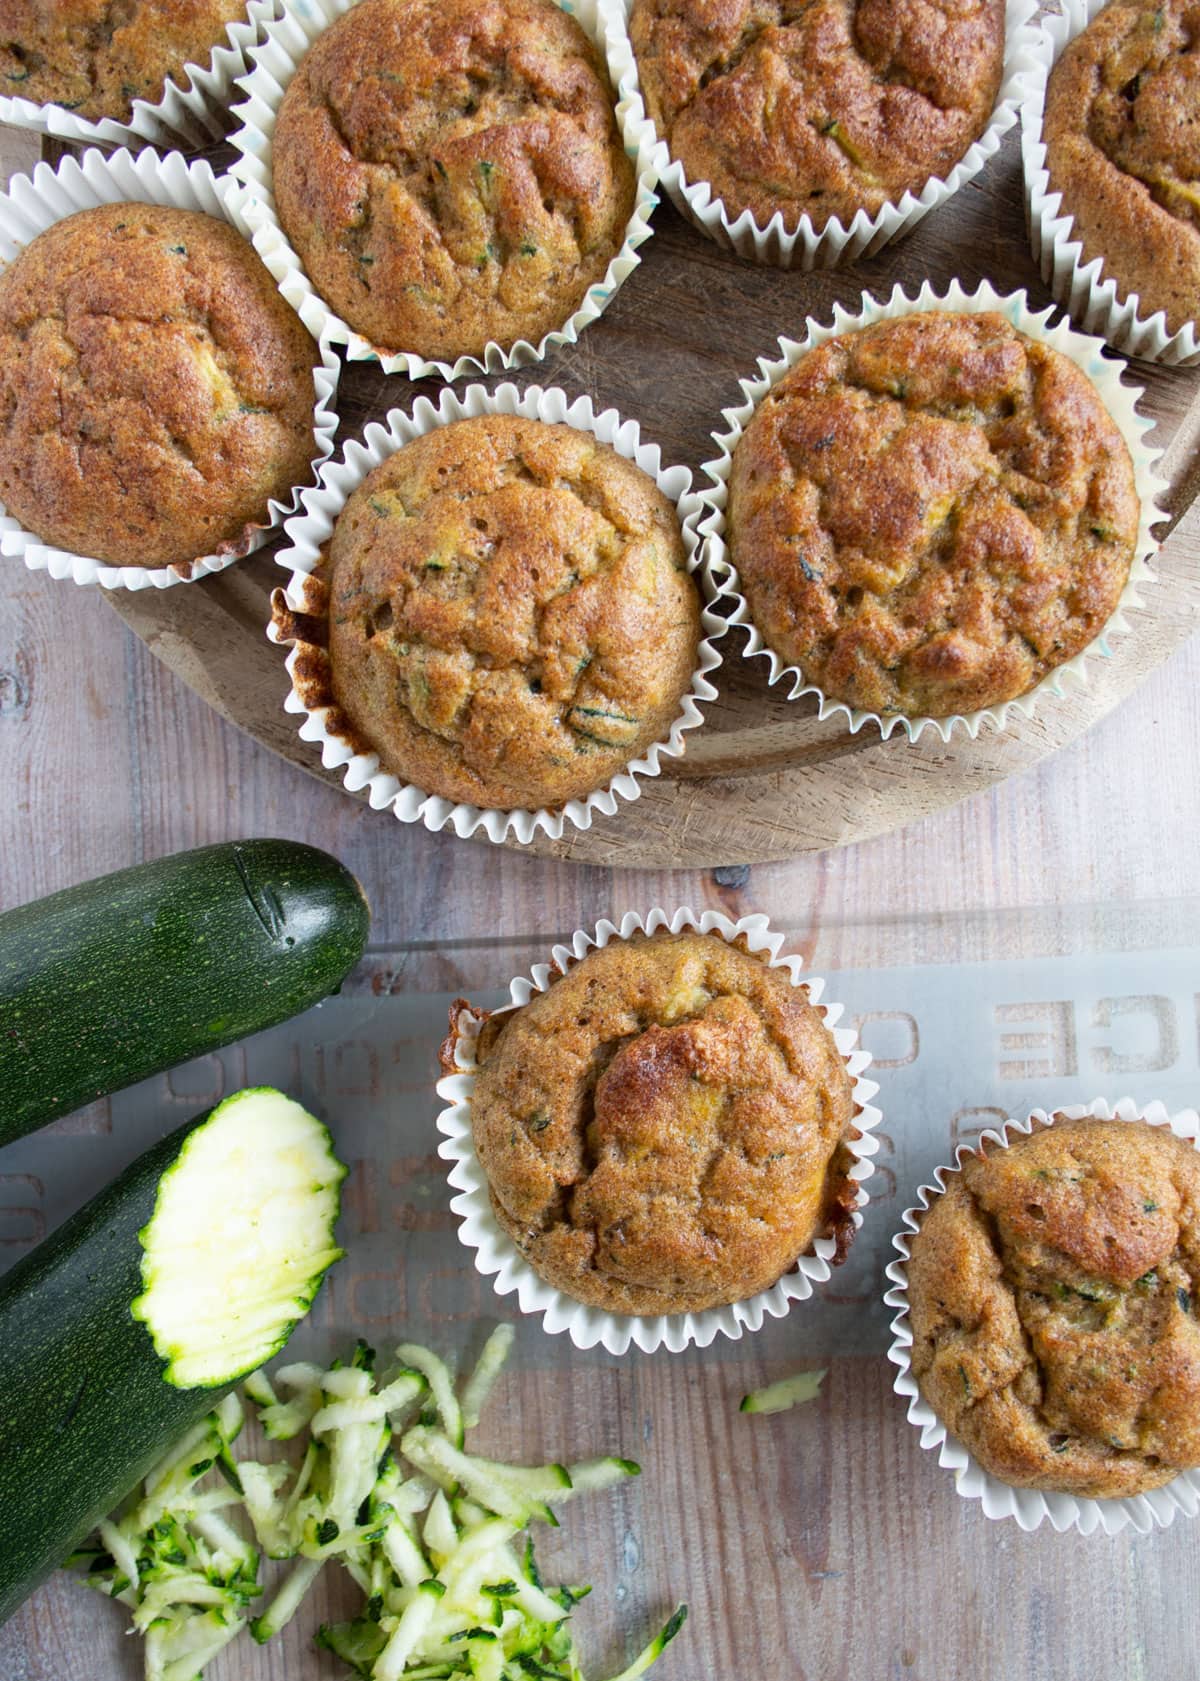 Muffins in paper cases and a zucchini, some of it grated.